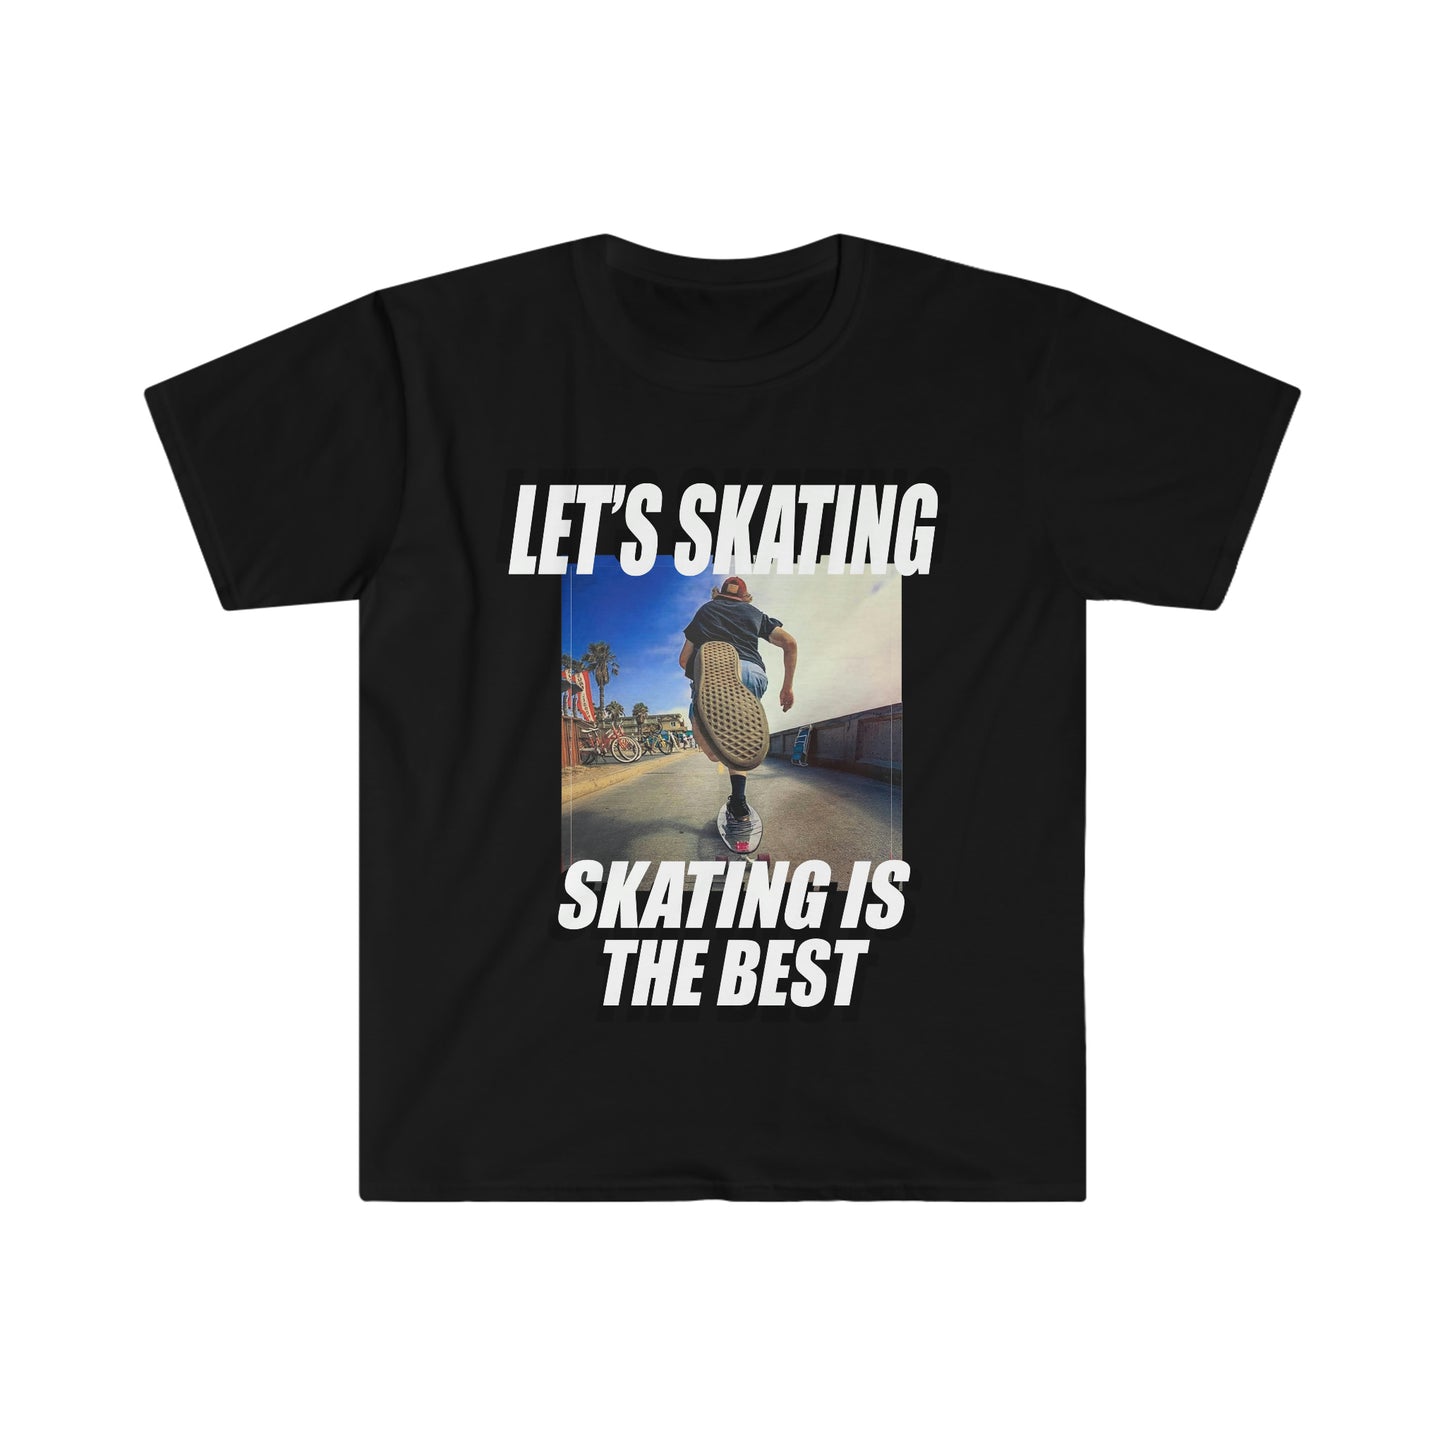 Let's Skating. Skating Is The Best.